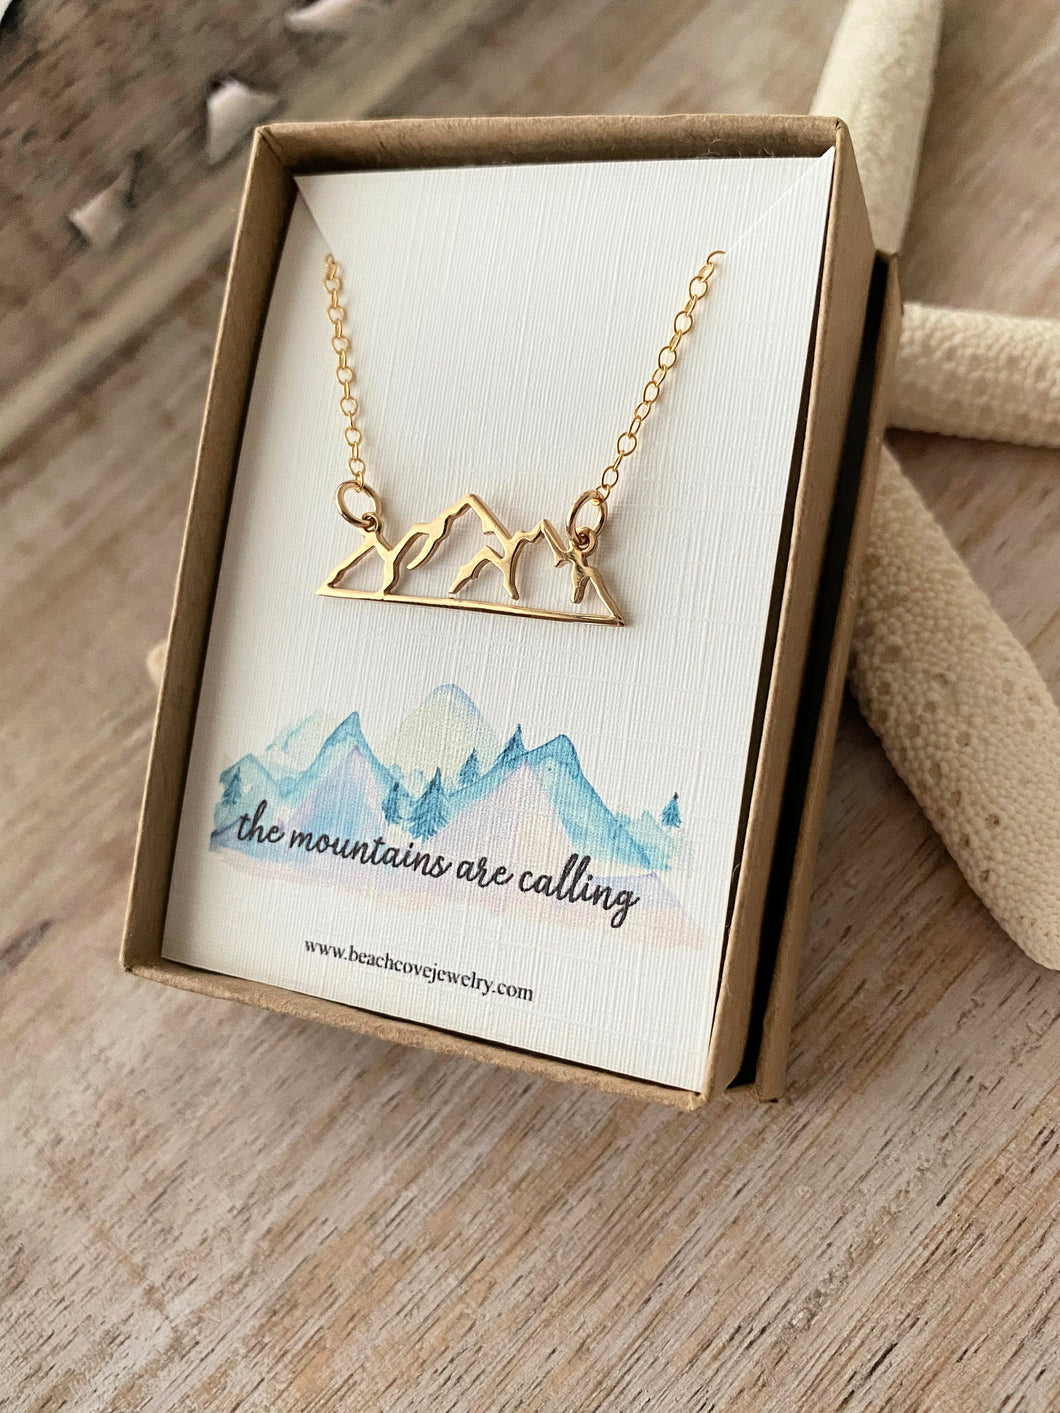 Mountain Silhouette Necklace - Choice of Sterling Silver or Bronze and 14k Gold filled - Mountain Outline Scene - Pacific Northwest Necklace